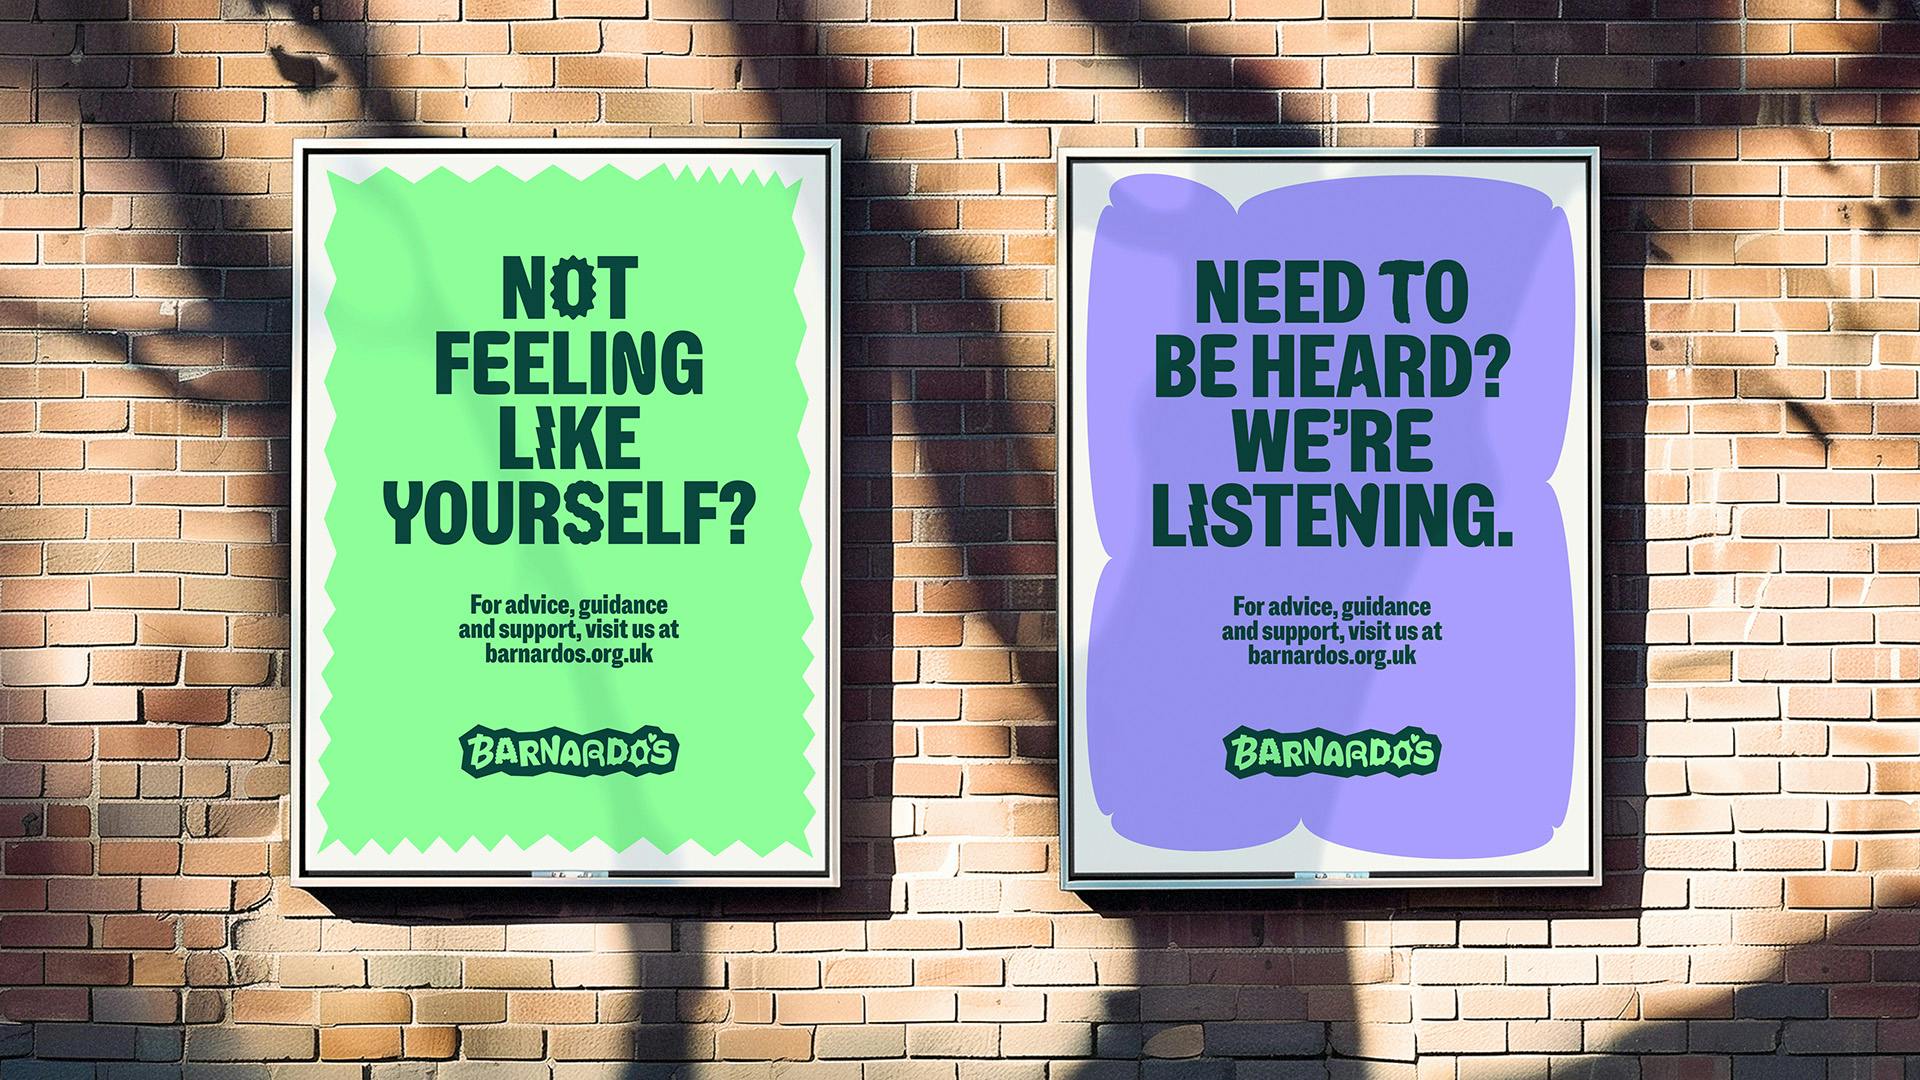 Image shows the new Barnardo's visual identity on two vertical outdoor posters. One reads 'not feeling like yourself?' on a green background, the other reads 'Need to be heard? We're listening' on a purple background